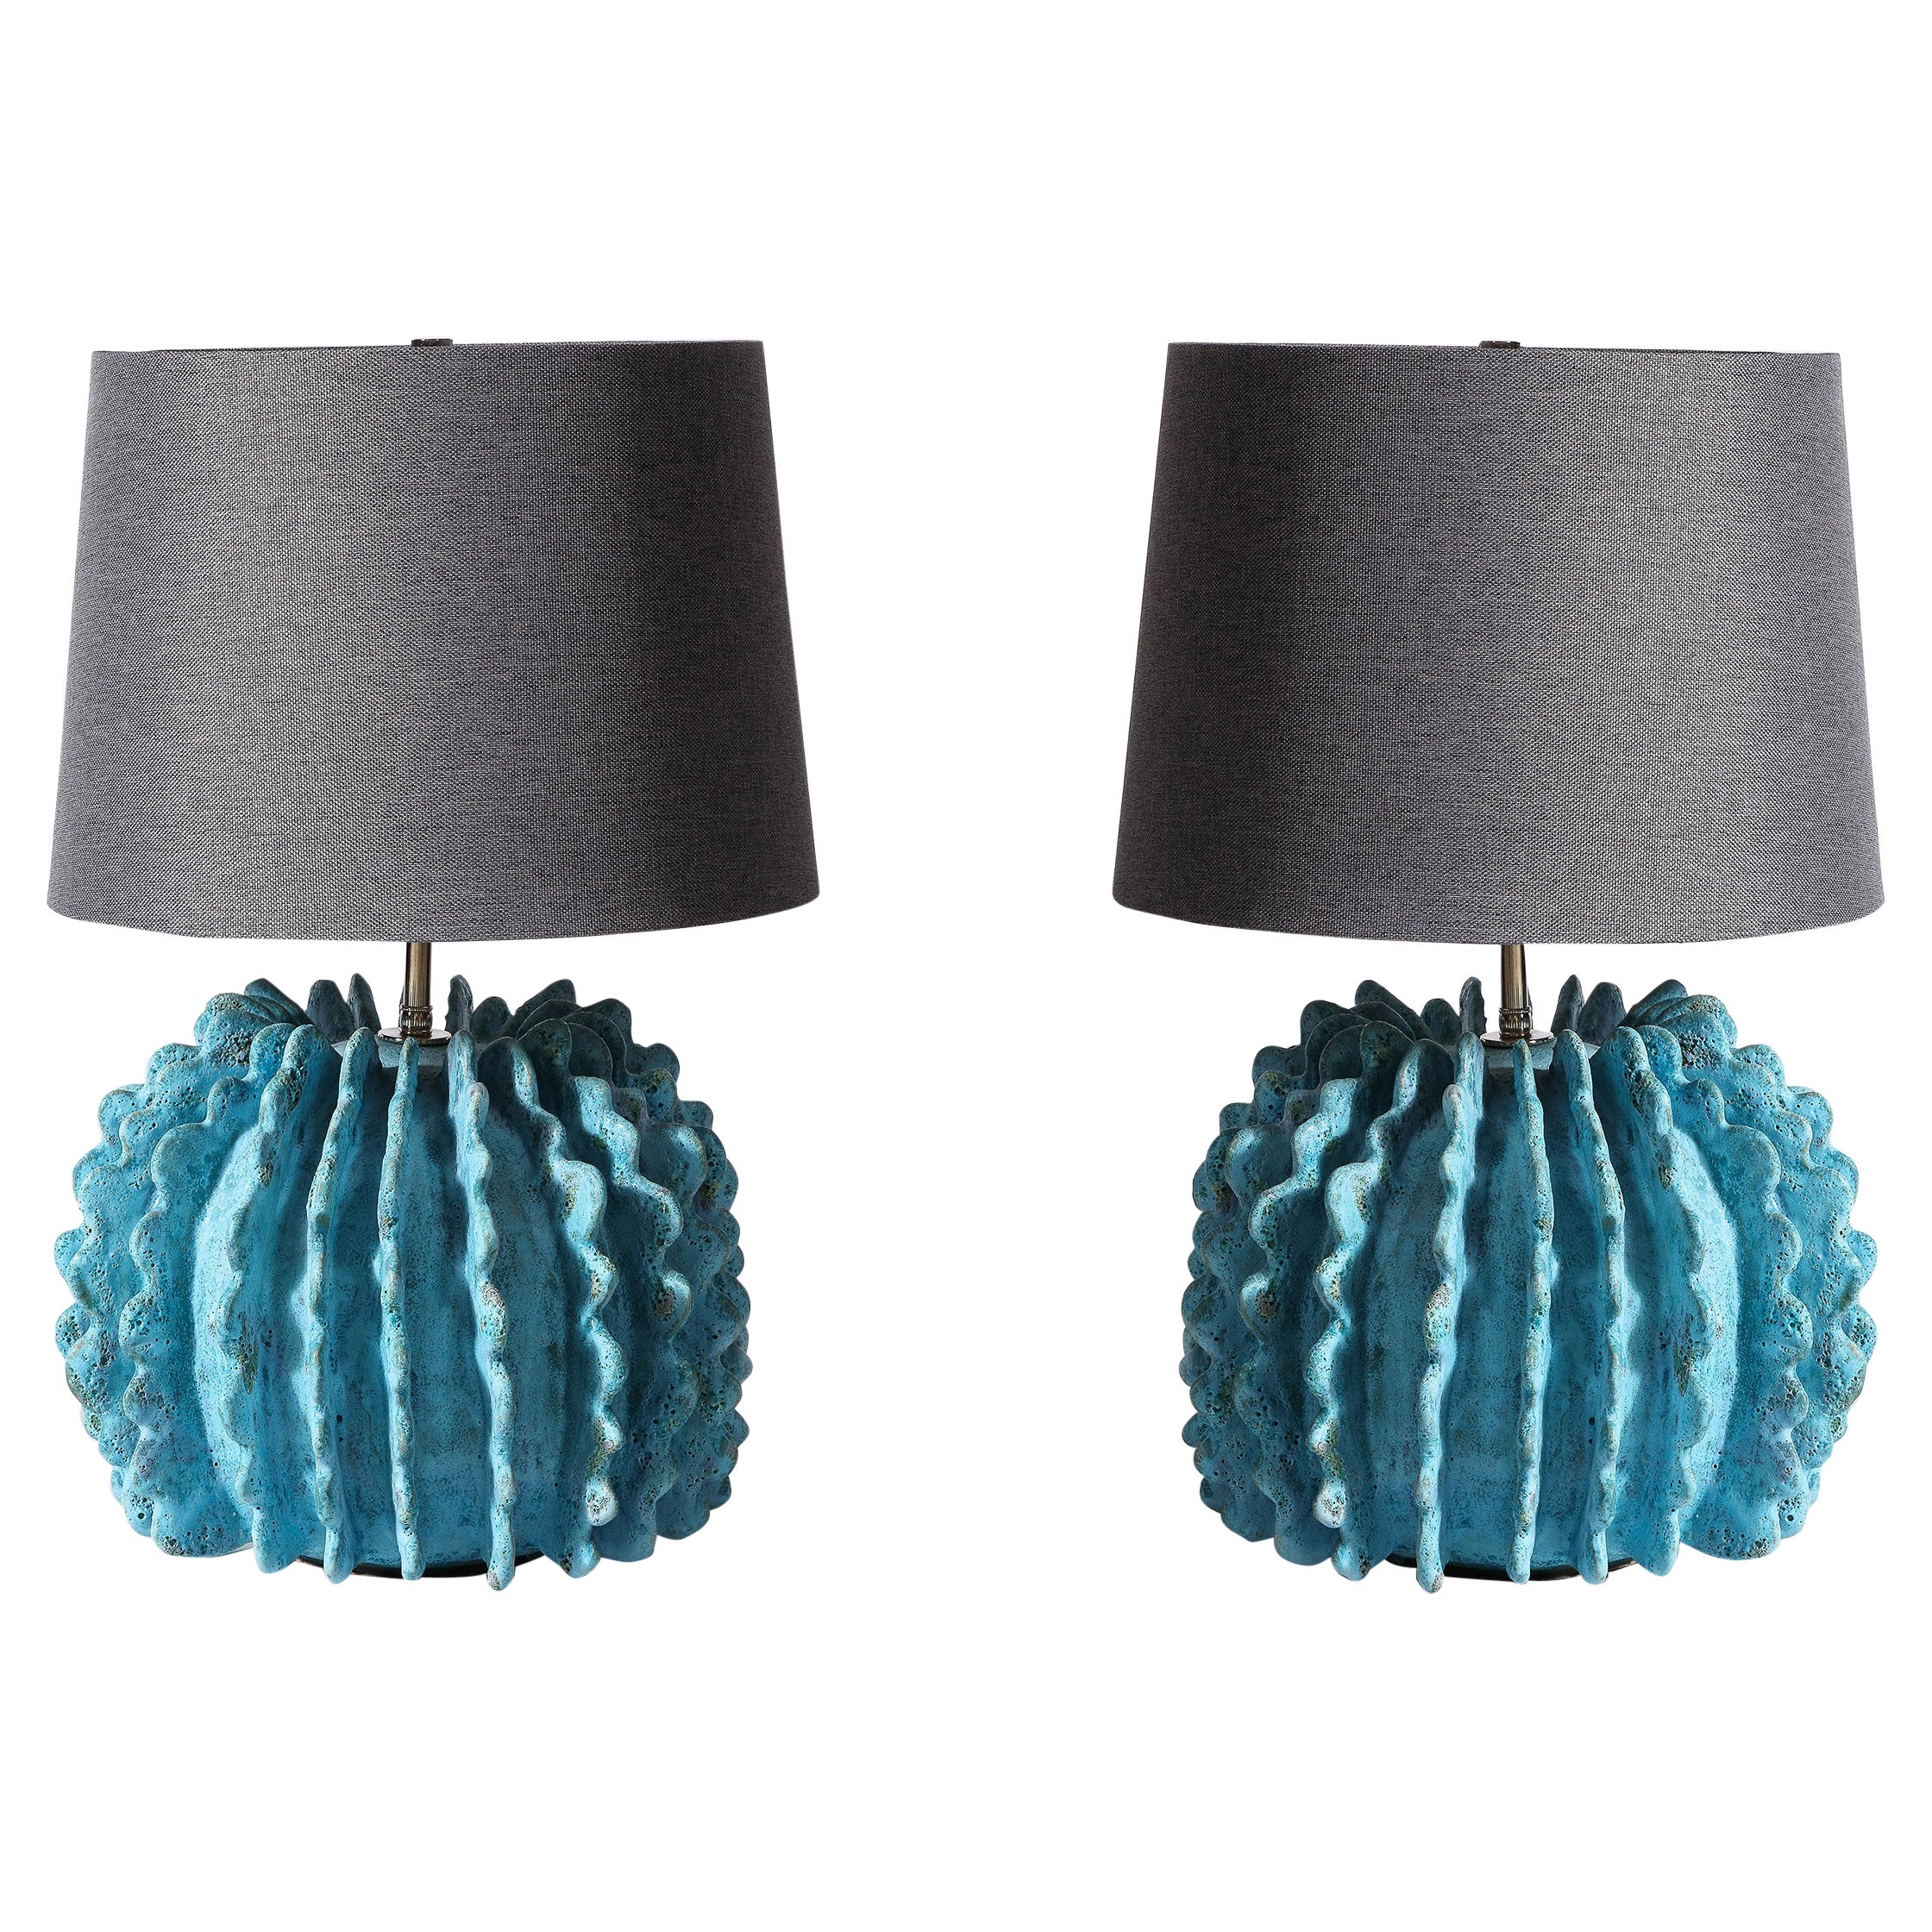 Pair of Ceramic Turquoise Lamps by Shizue Imai